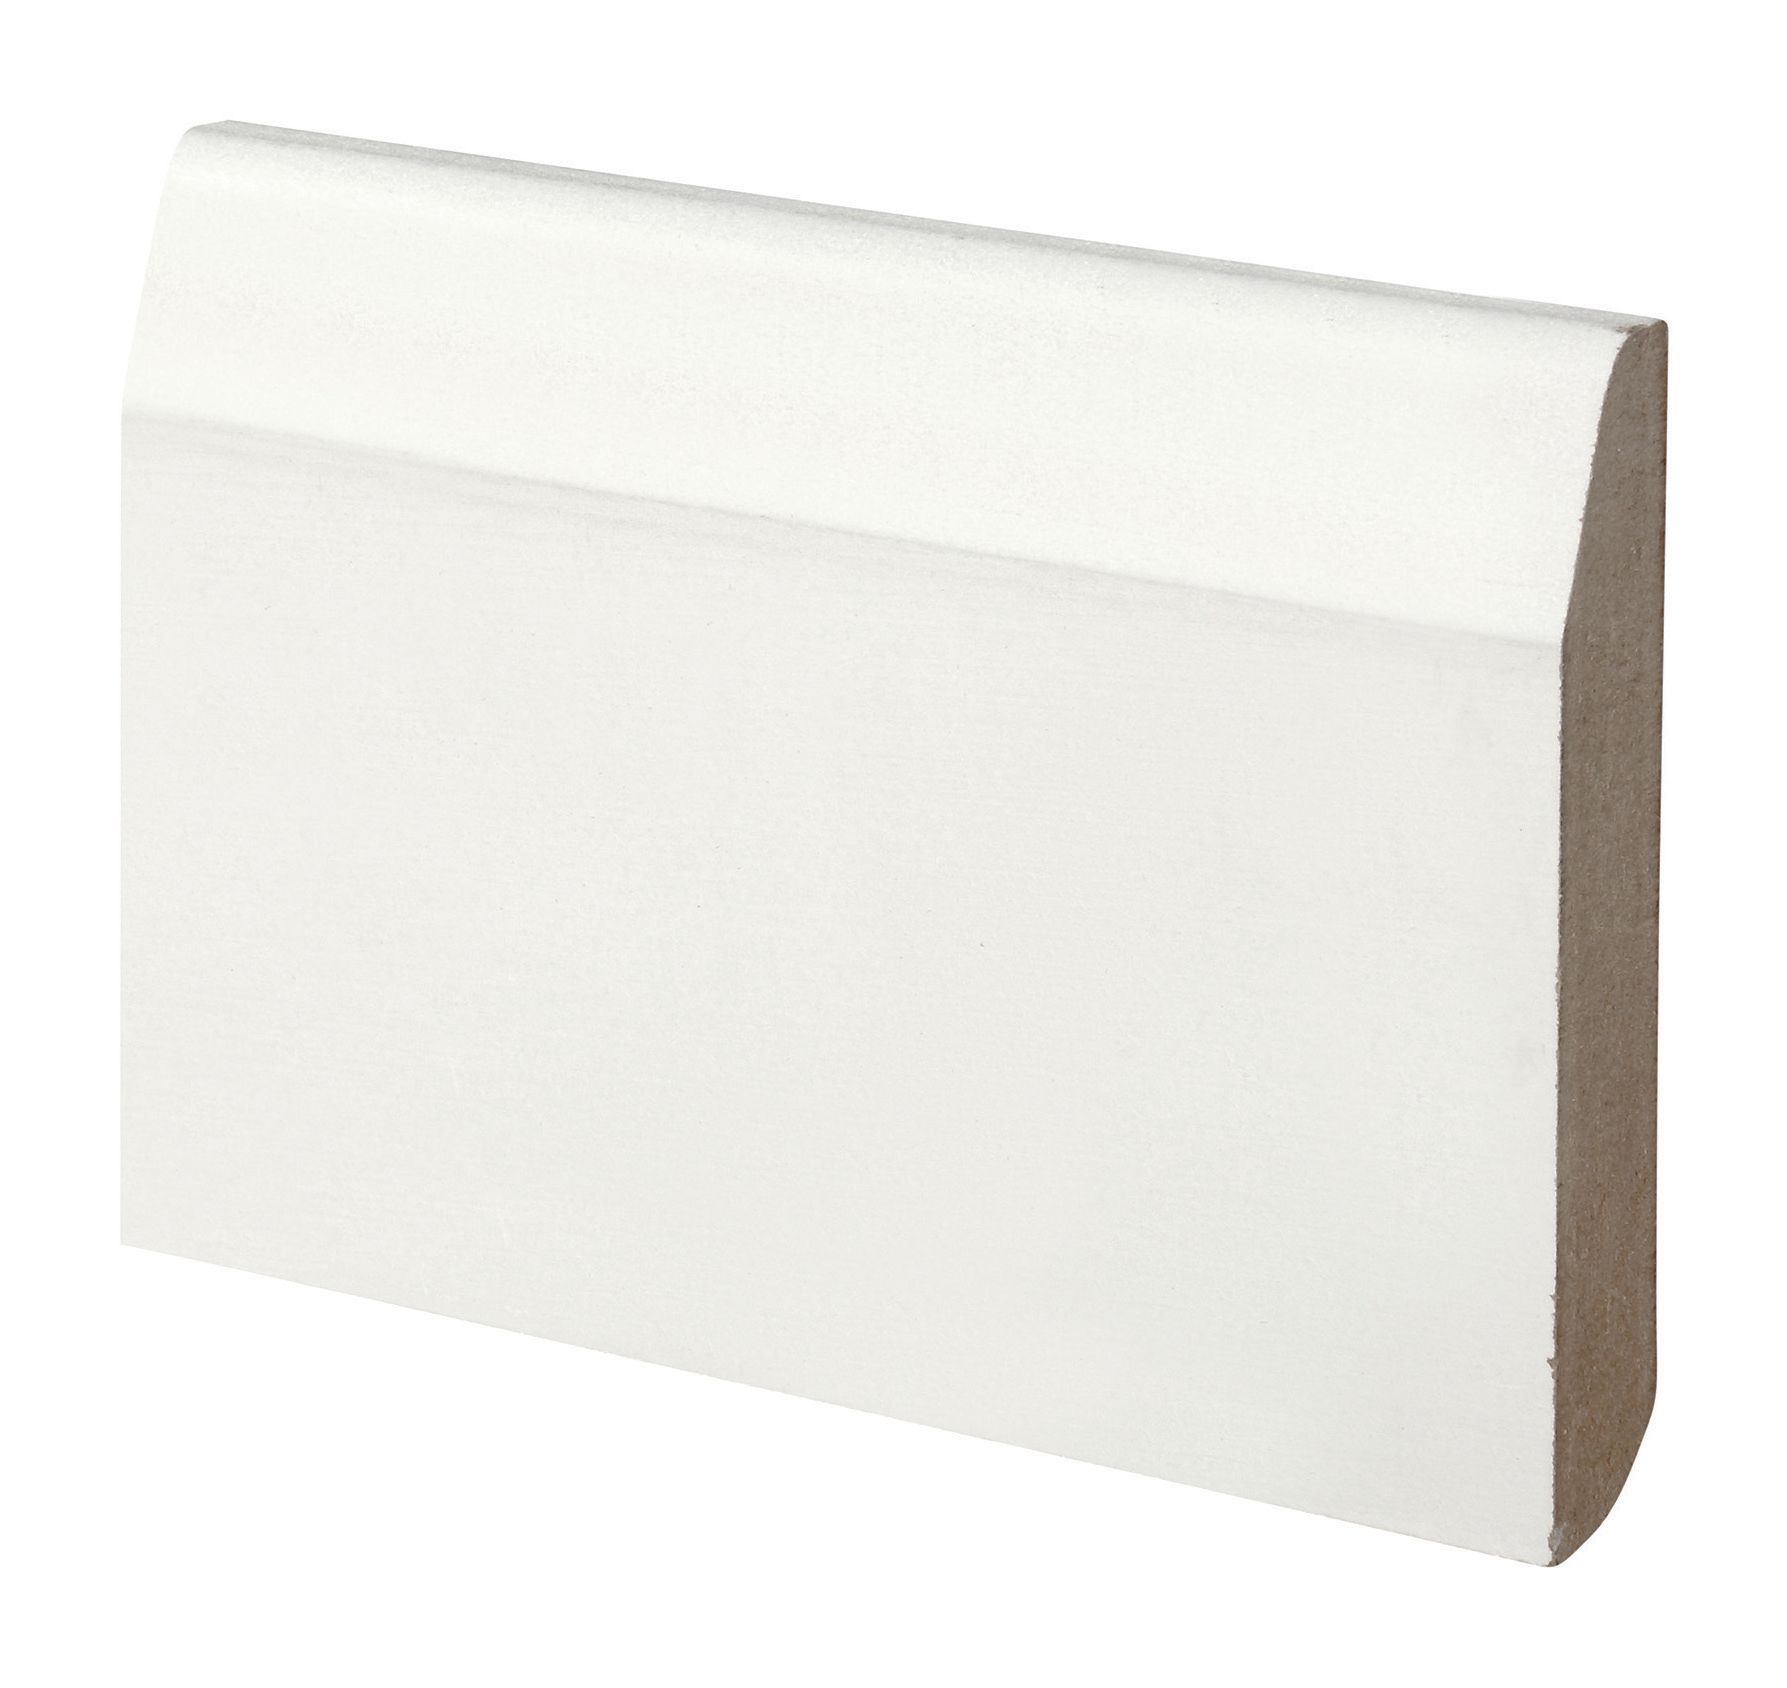 Image of Wickes Dual Purpose Chamfered/Bullnose Primed MDF Skirting - 14.5 x 94 x 2400mm - Pack of 5